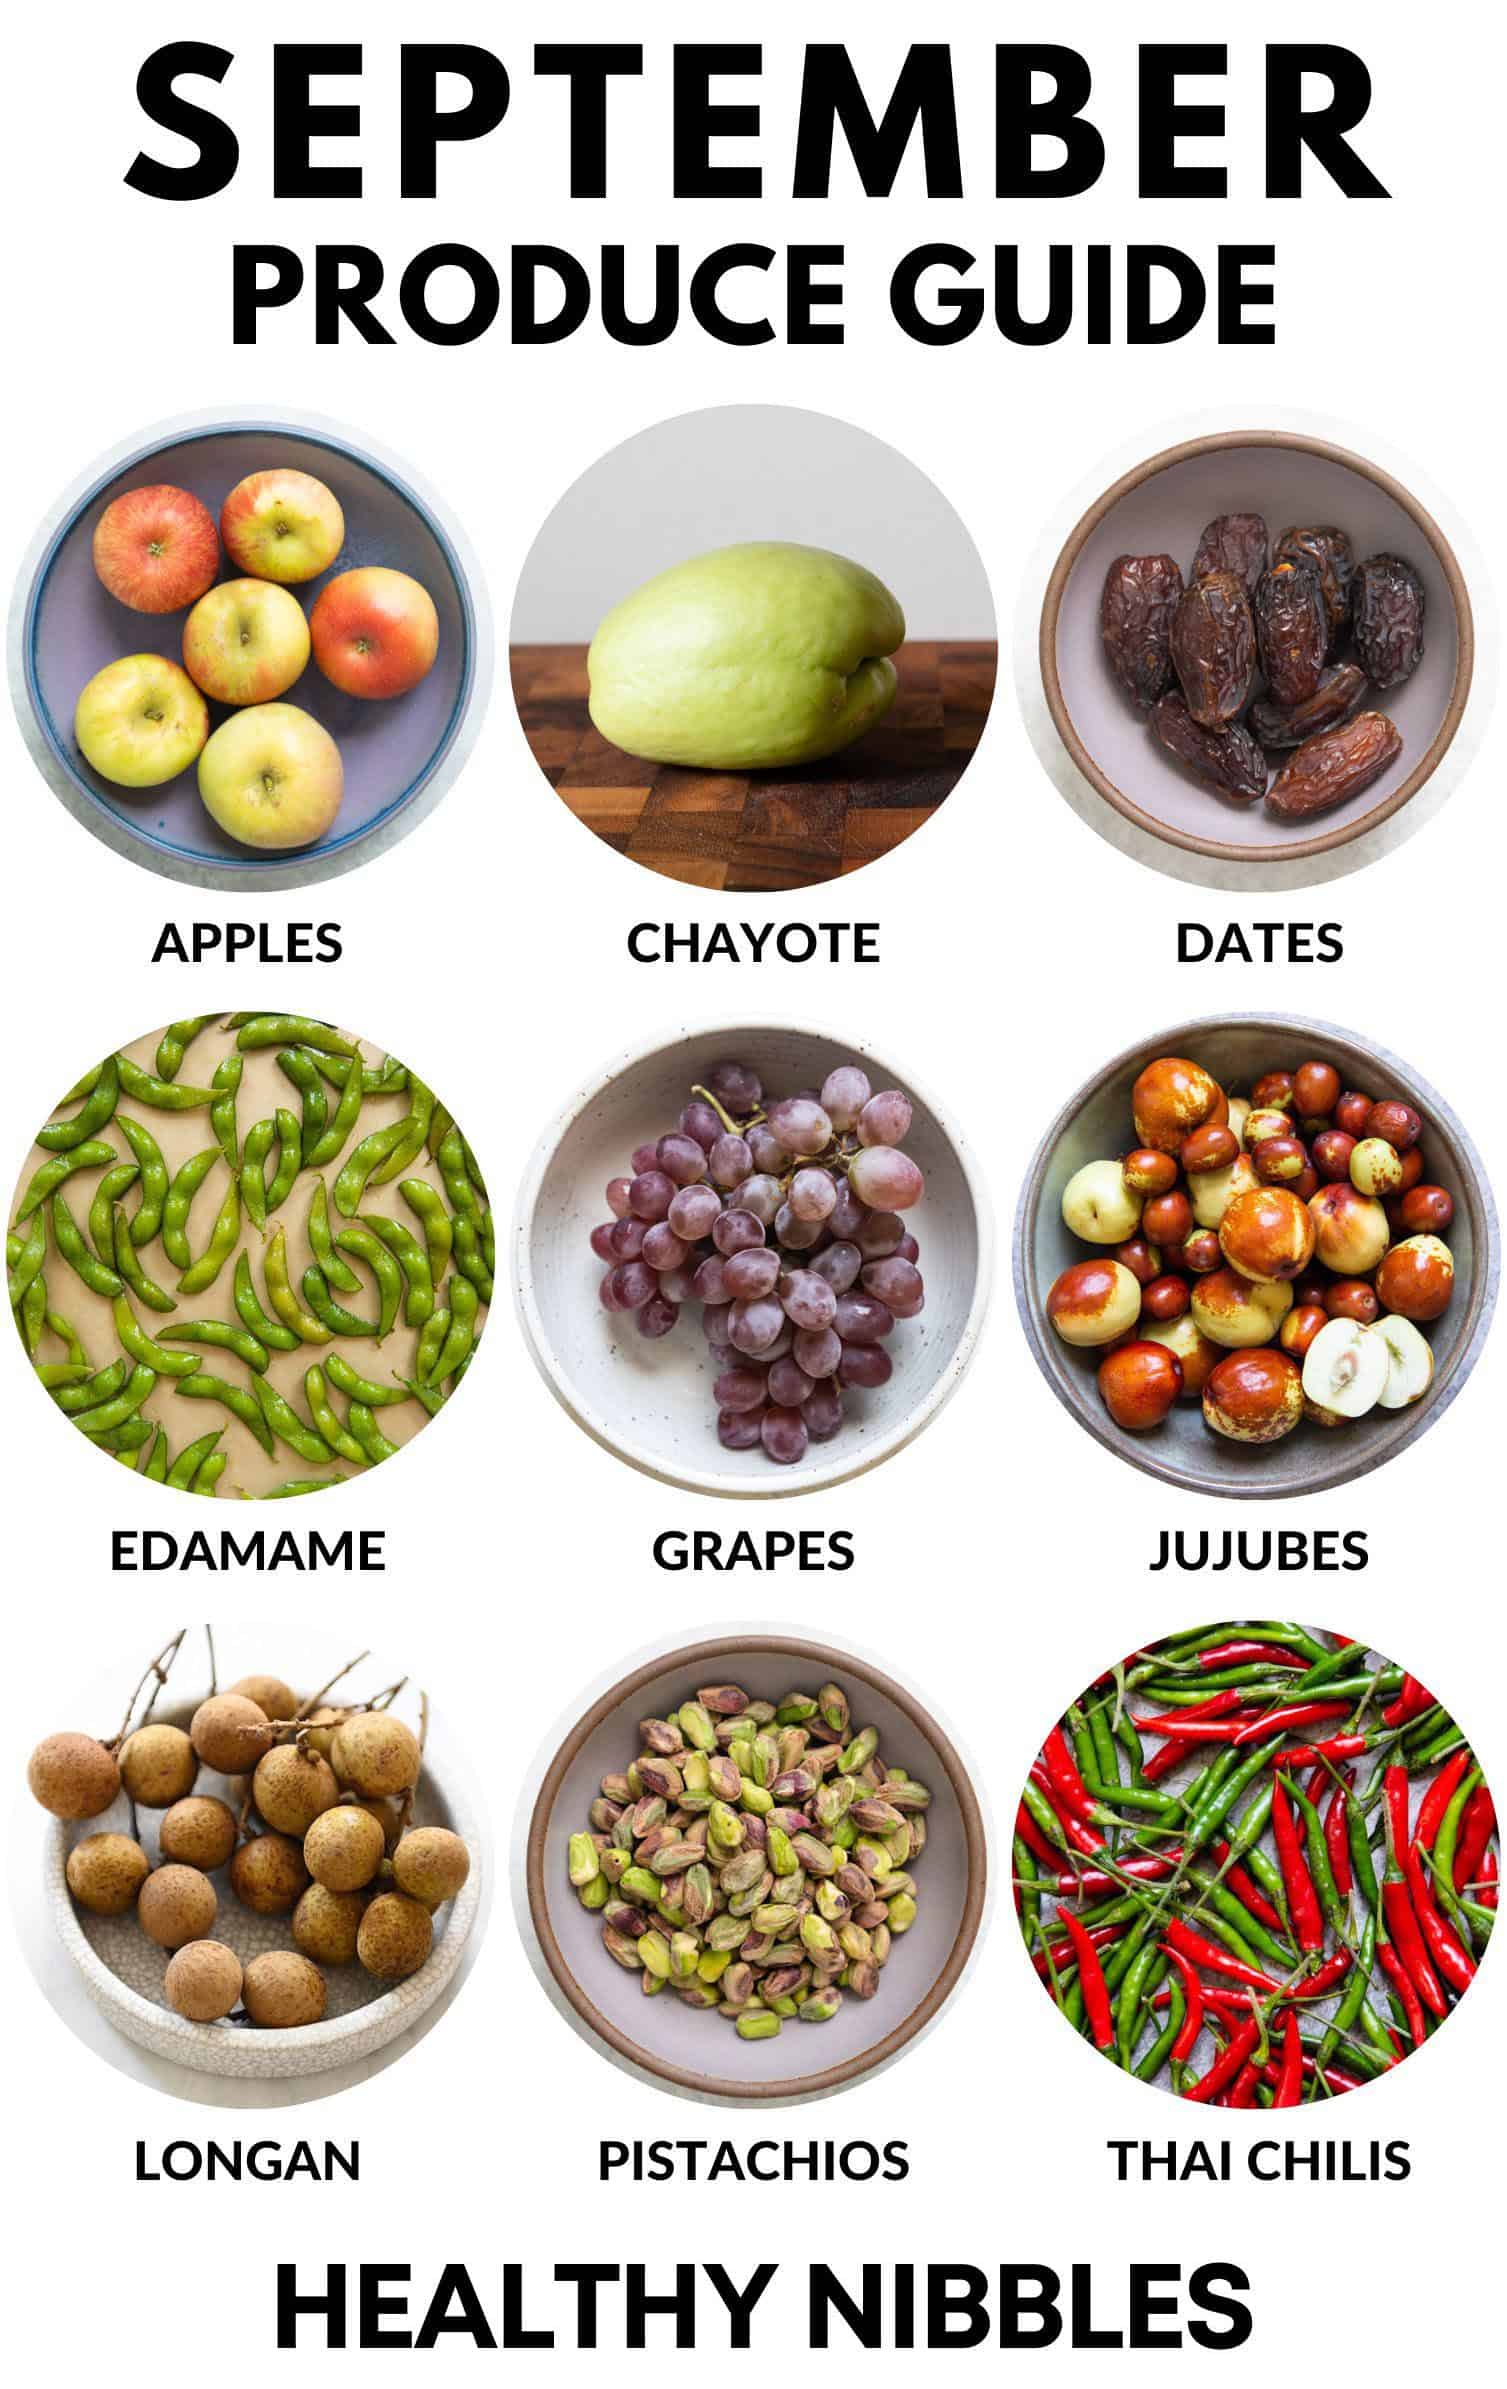 September Produce Guide Collage